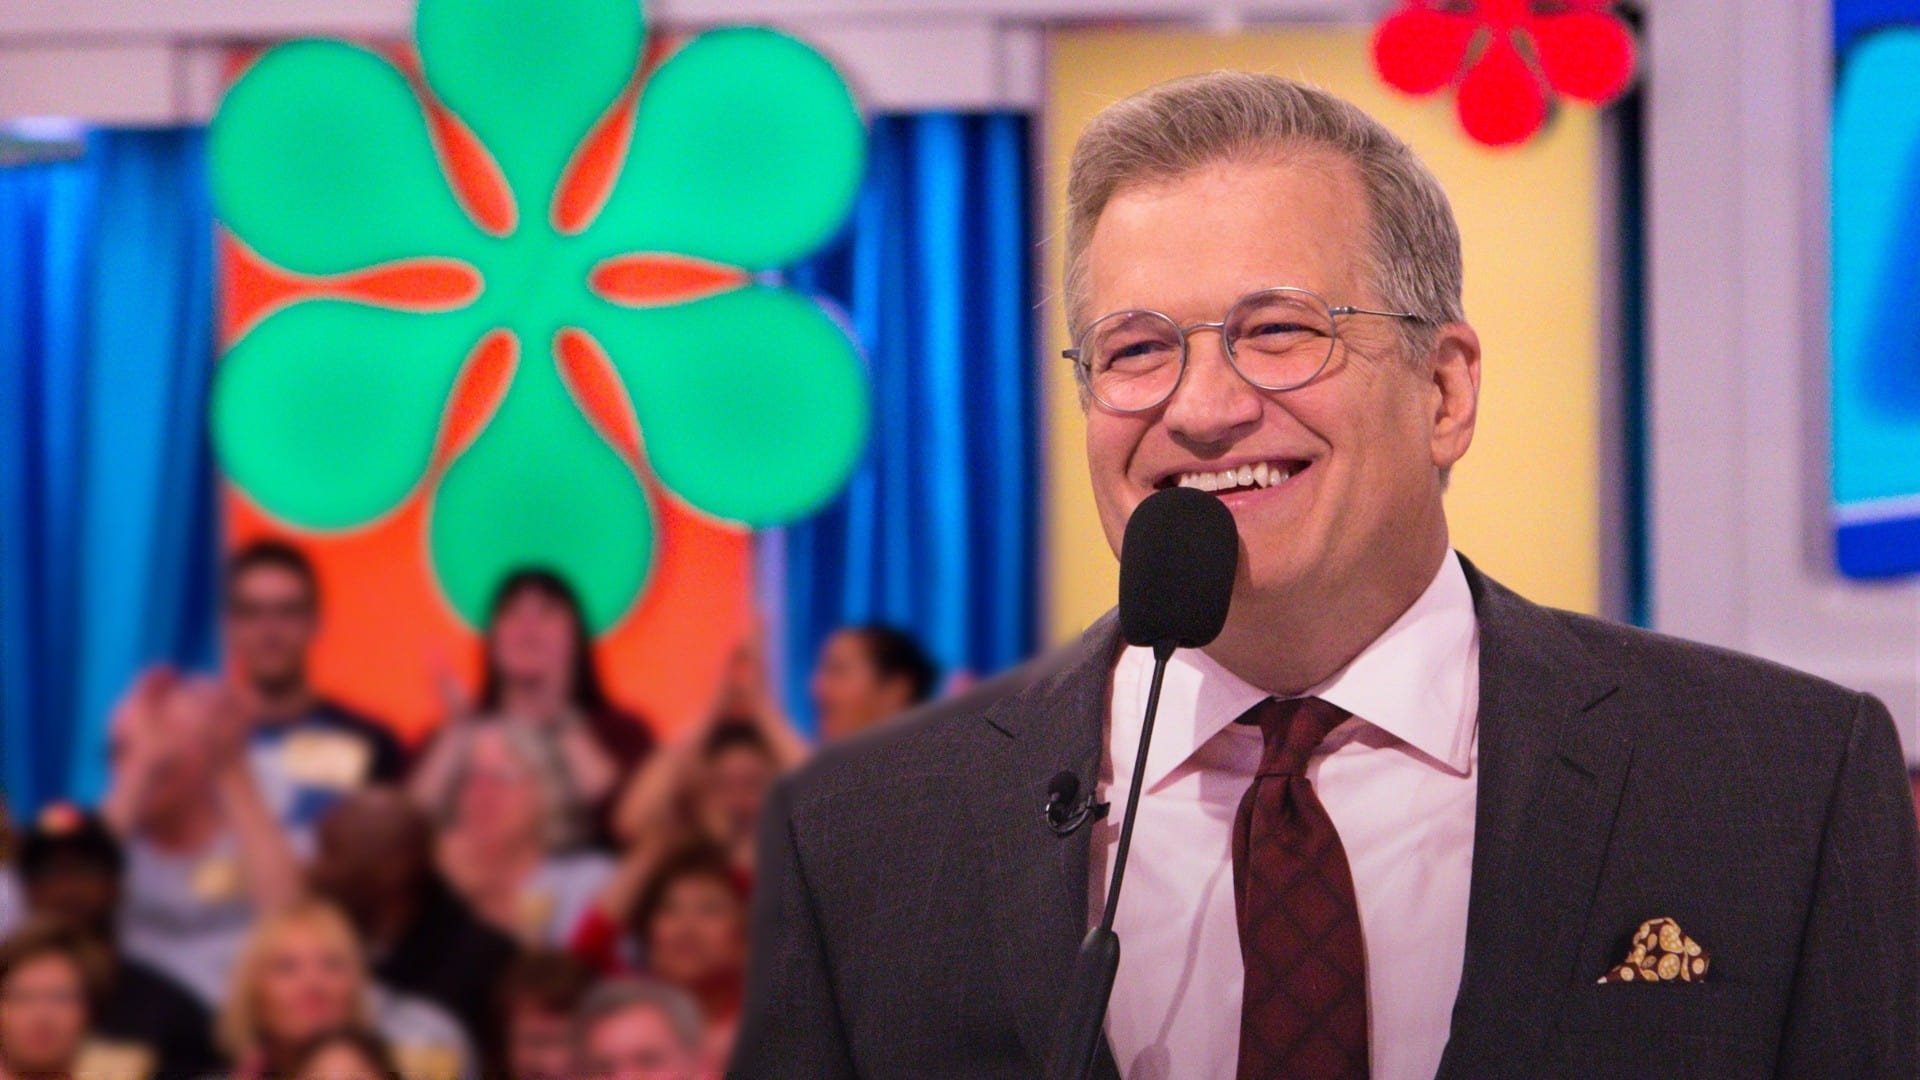 The Price Is Right - Season 2 Episode 229 : The Price Is Right Season 2 Episode 229